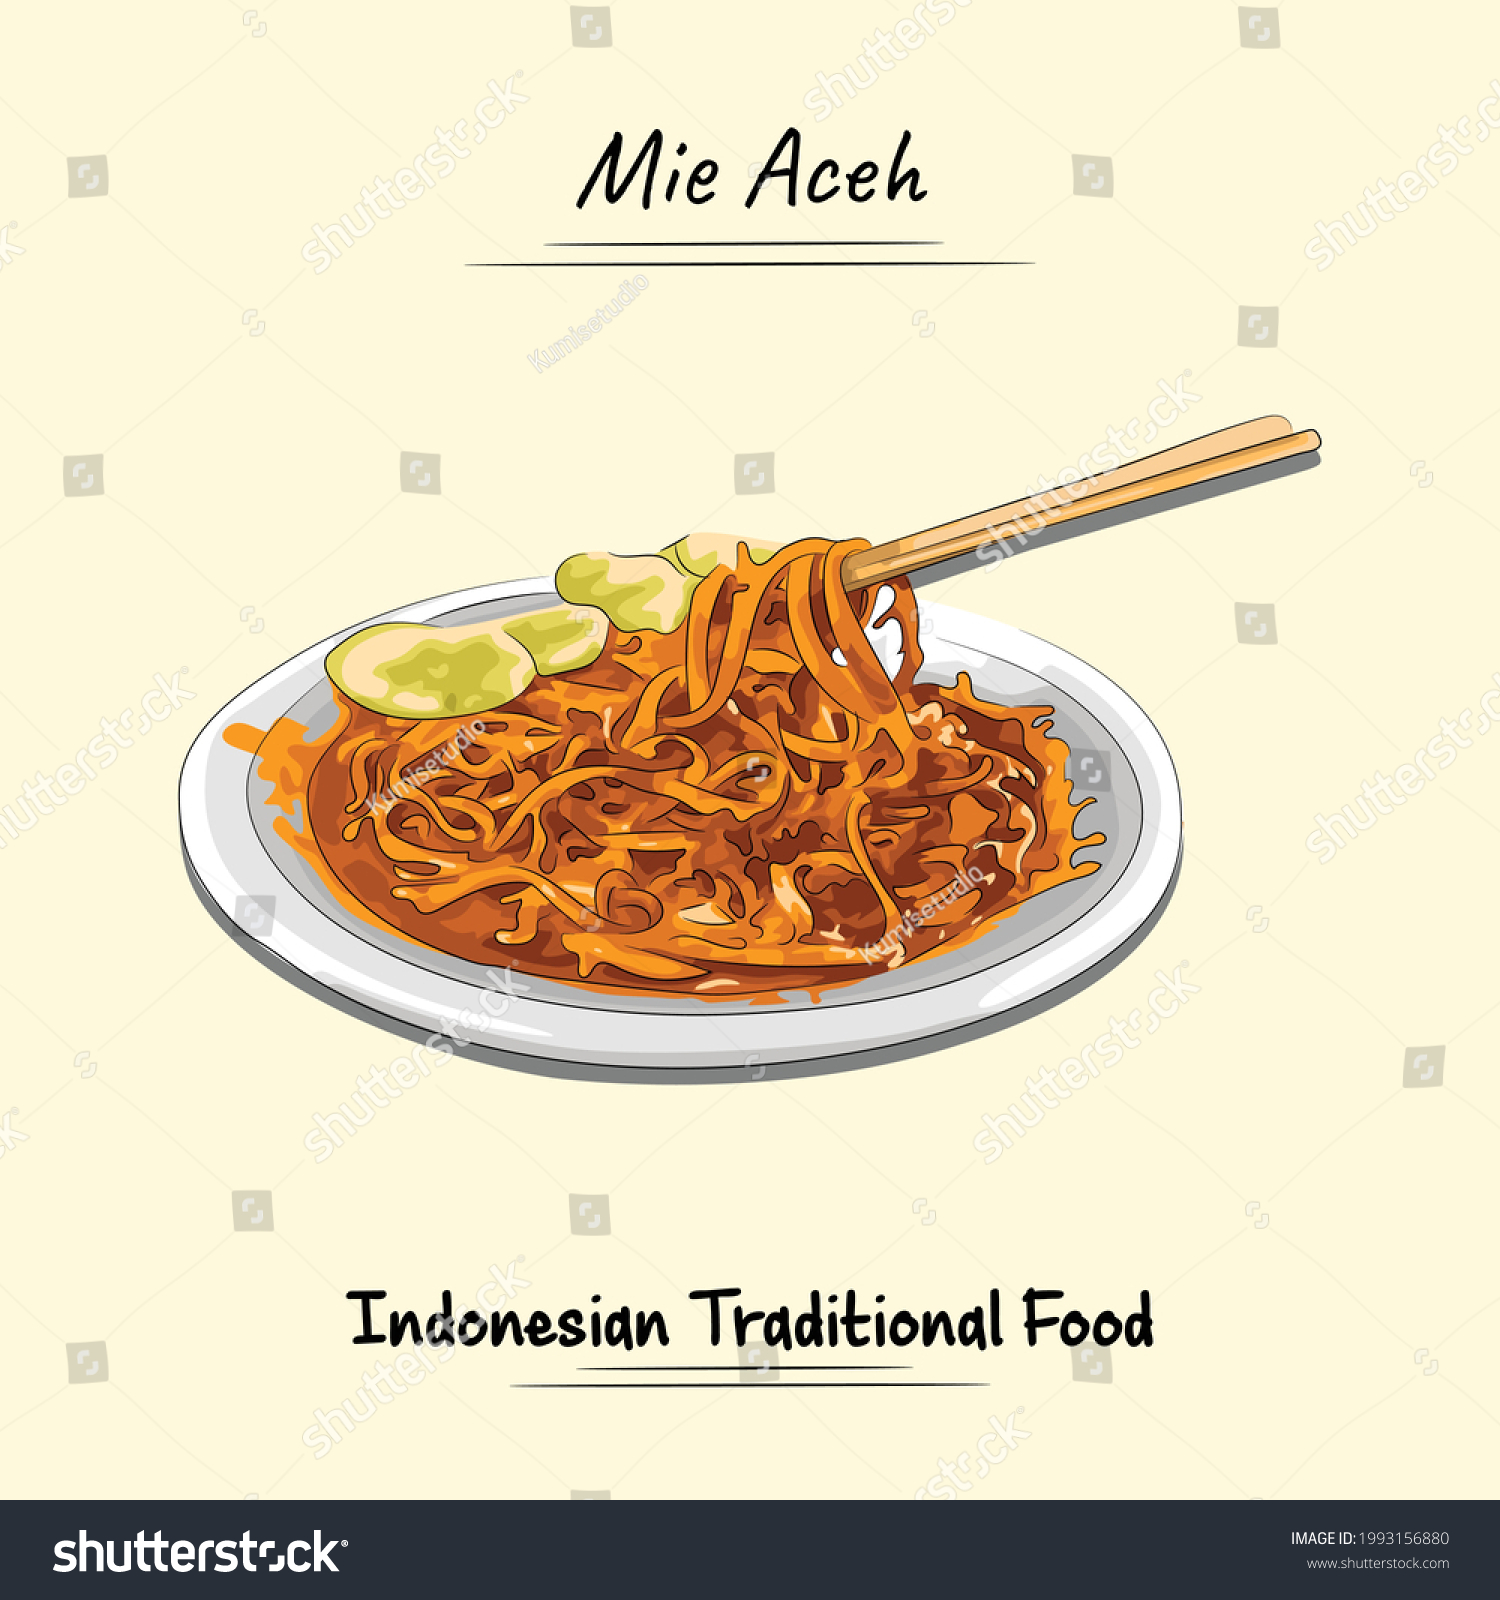 SVG of Mie Aceh Illustration Sketch And Vector Style, Traditional Food From Aceh, Good to use for restaurant menu, Indonesian food recipe book, and food content. svg